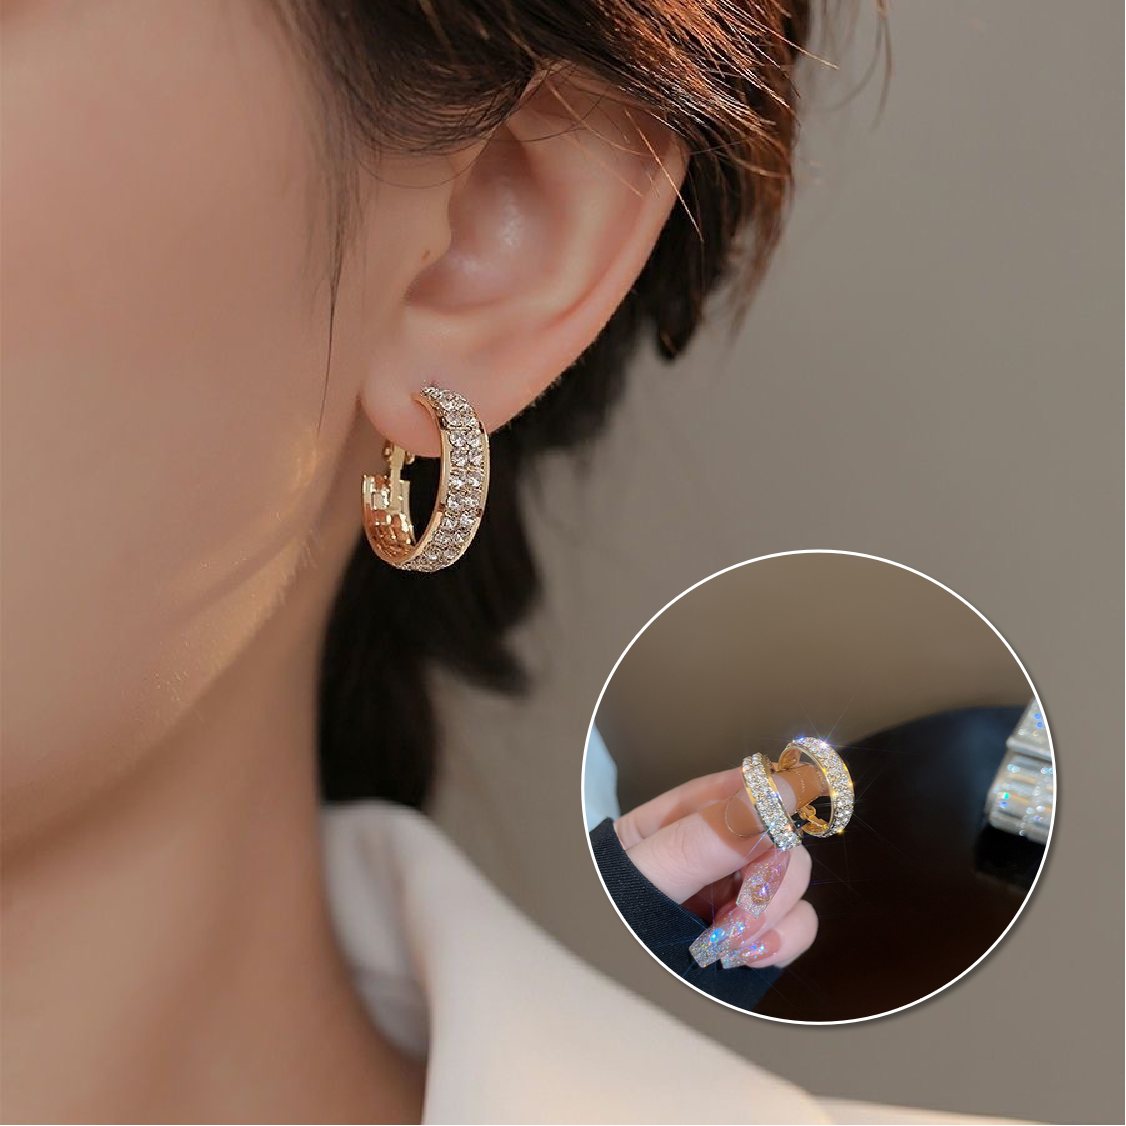 Super Strong LymphDetox Magnetherapy Weight Loss Germanium Earrings